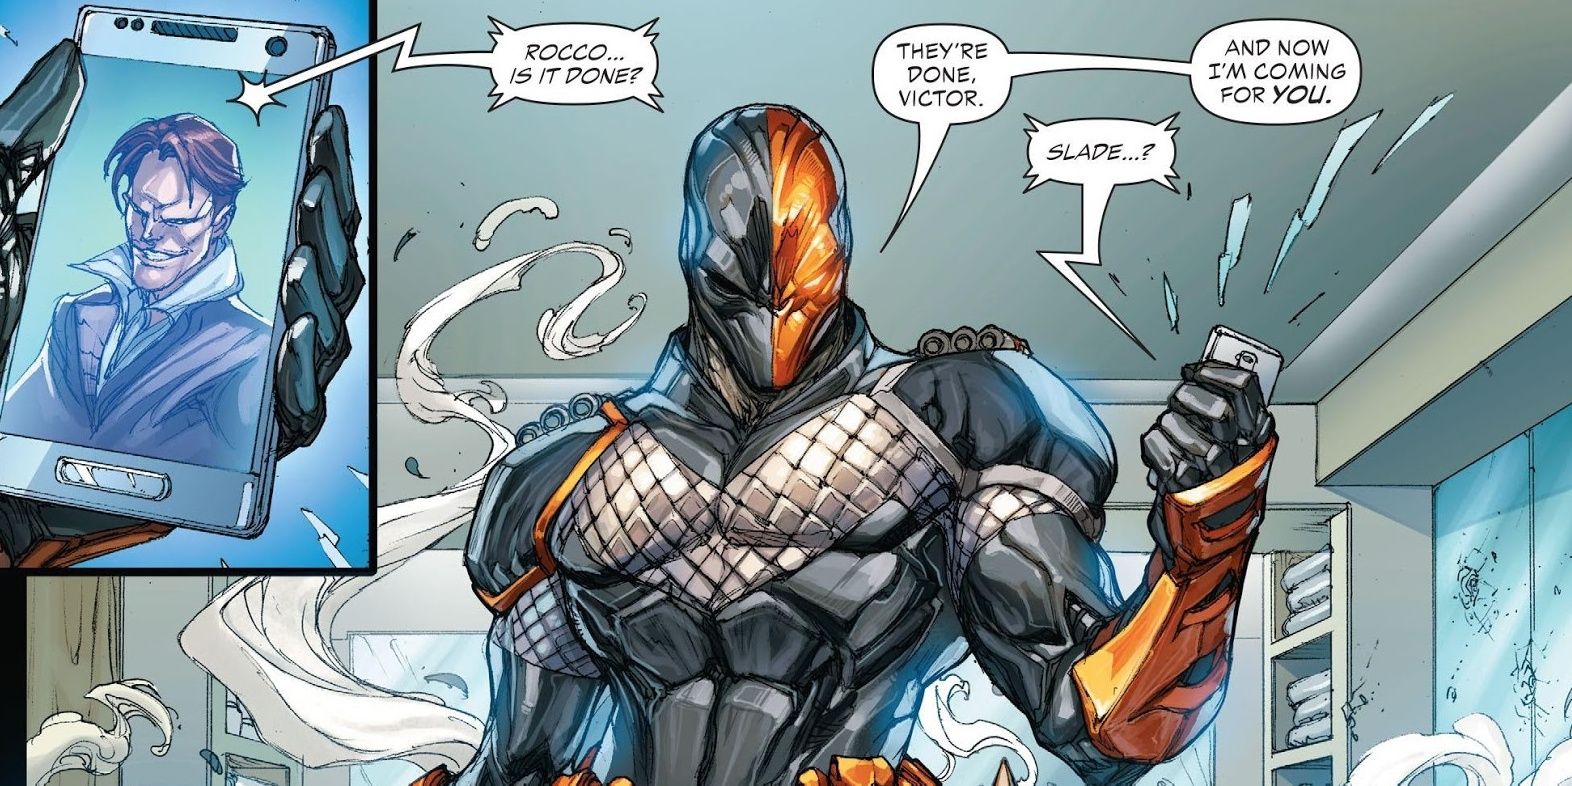 8 Deathstroke takes out the league